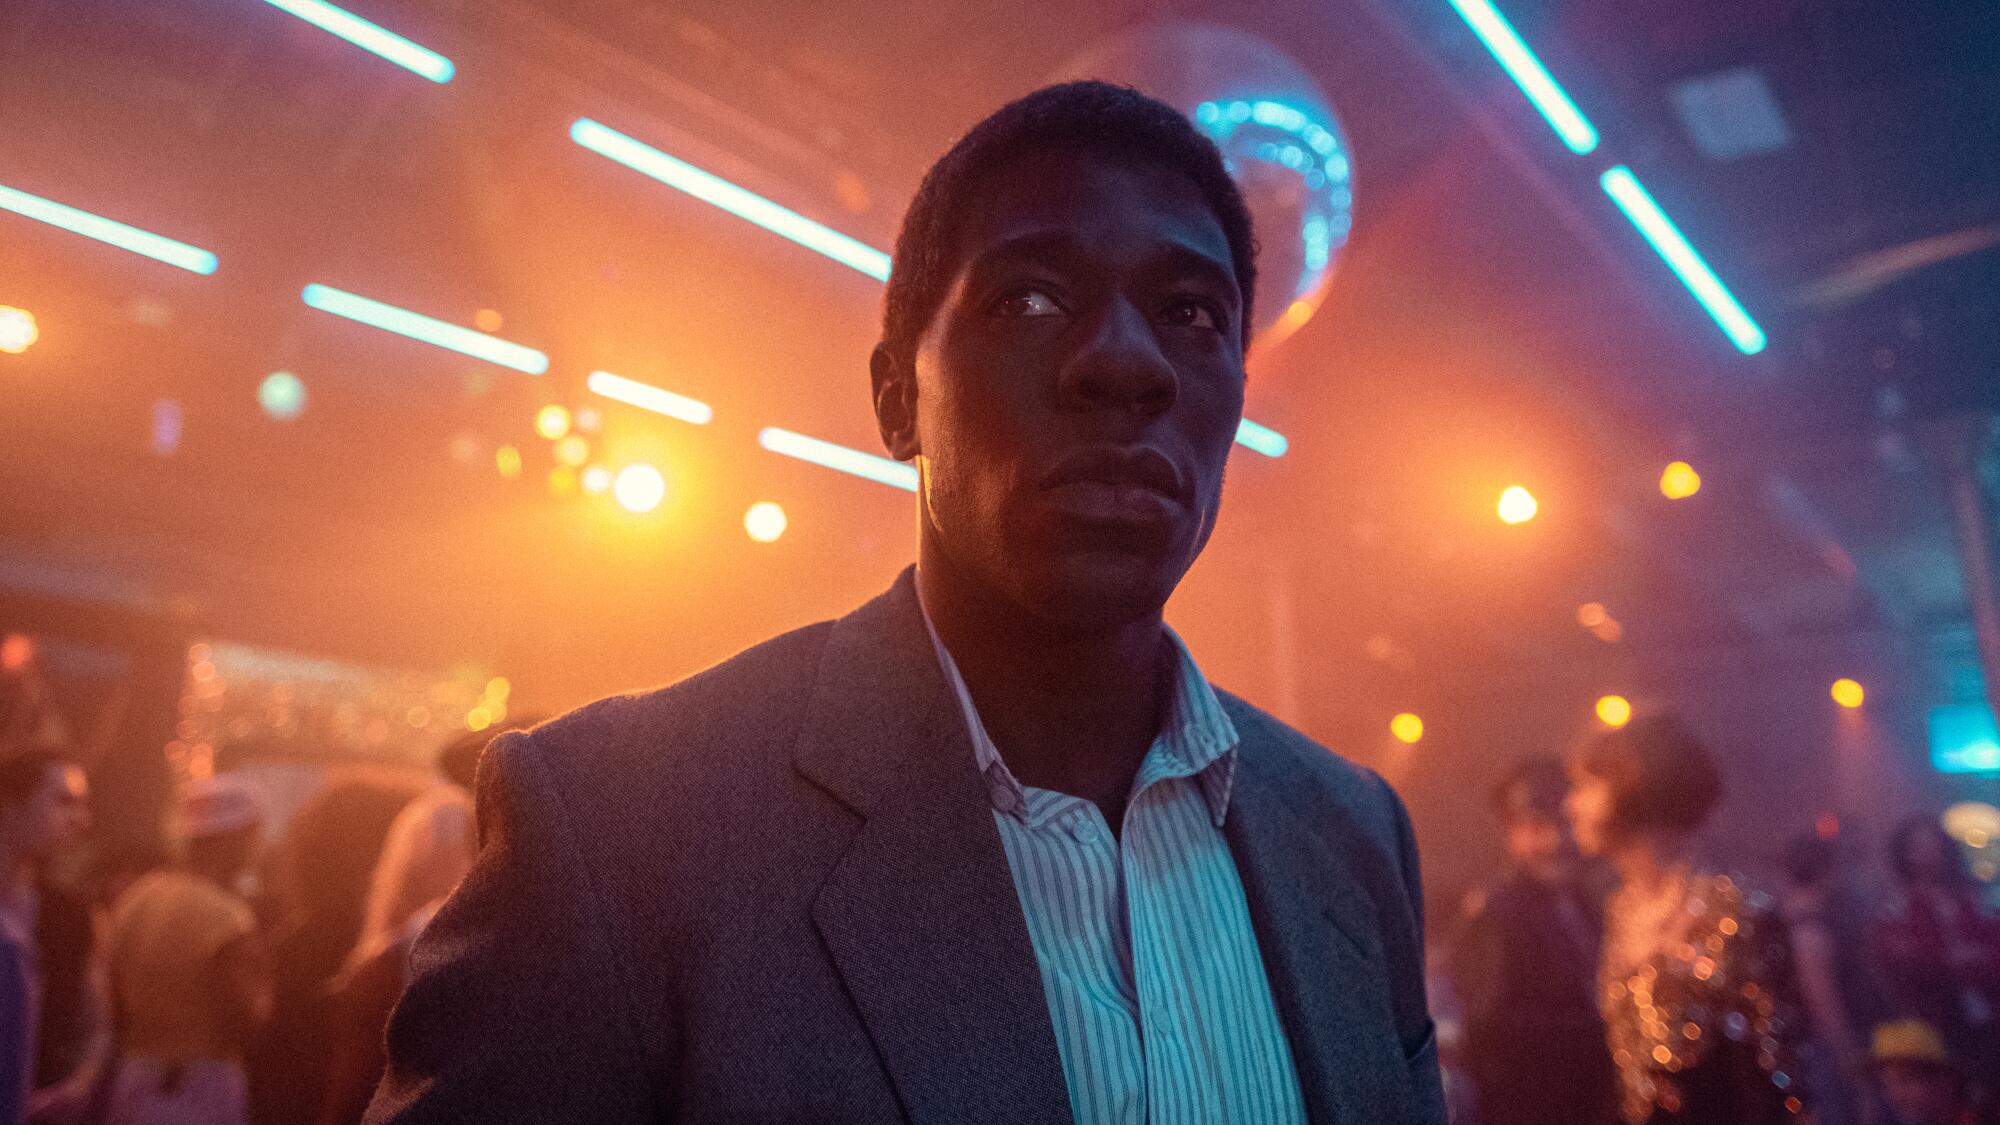 A man in a shirt and blazer stands in a nightclub.